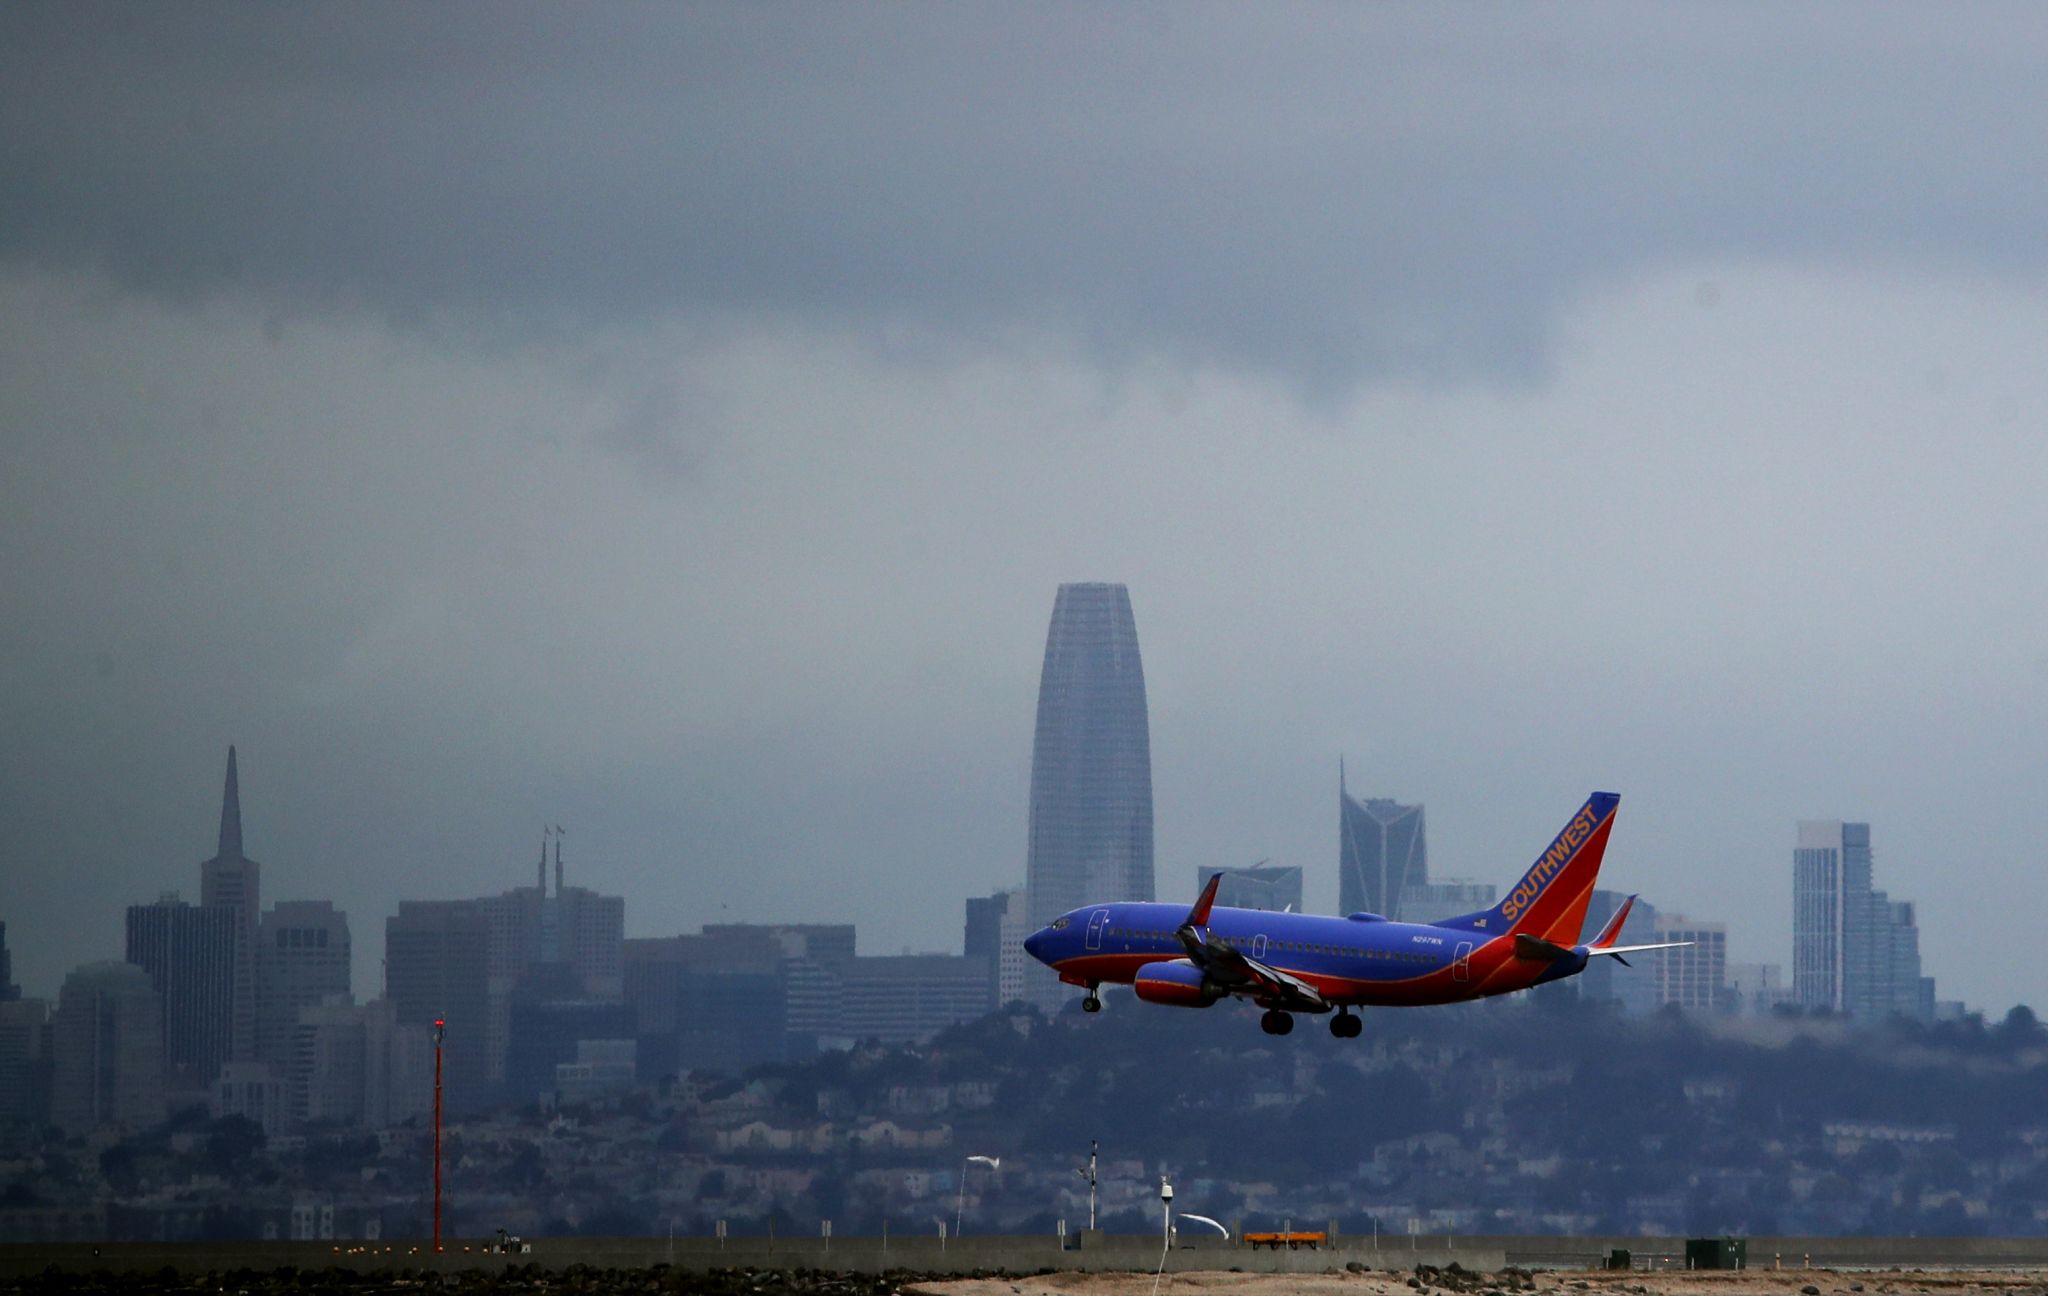 FAA issues ground stop at SFO, leading to hundreds of delays - SFGATE